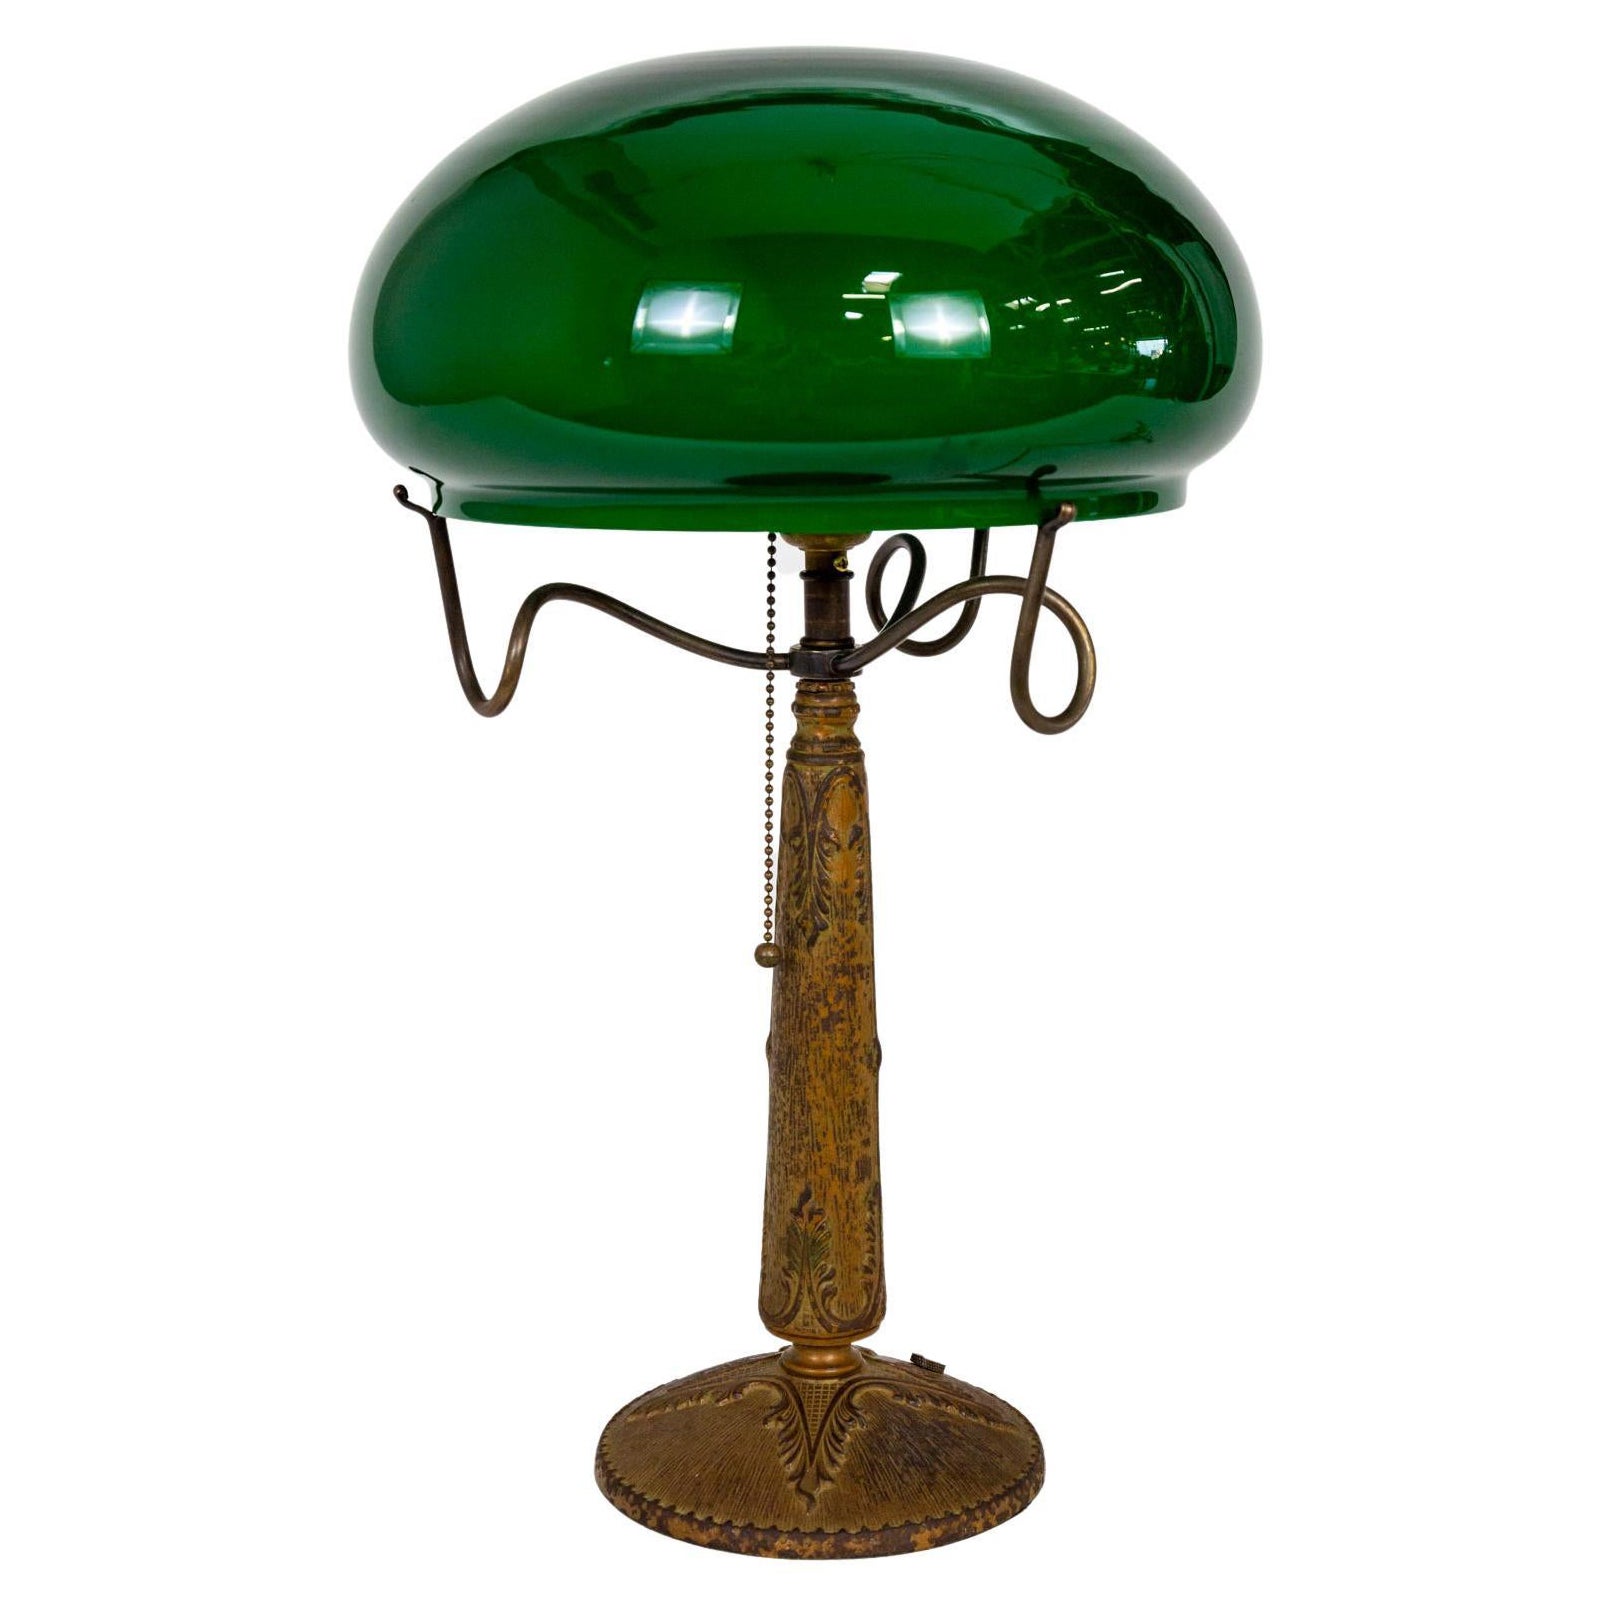 Textured Cast Metal Nouveau Lamp w/ Green Glass Shade & Curled Shade Holder